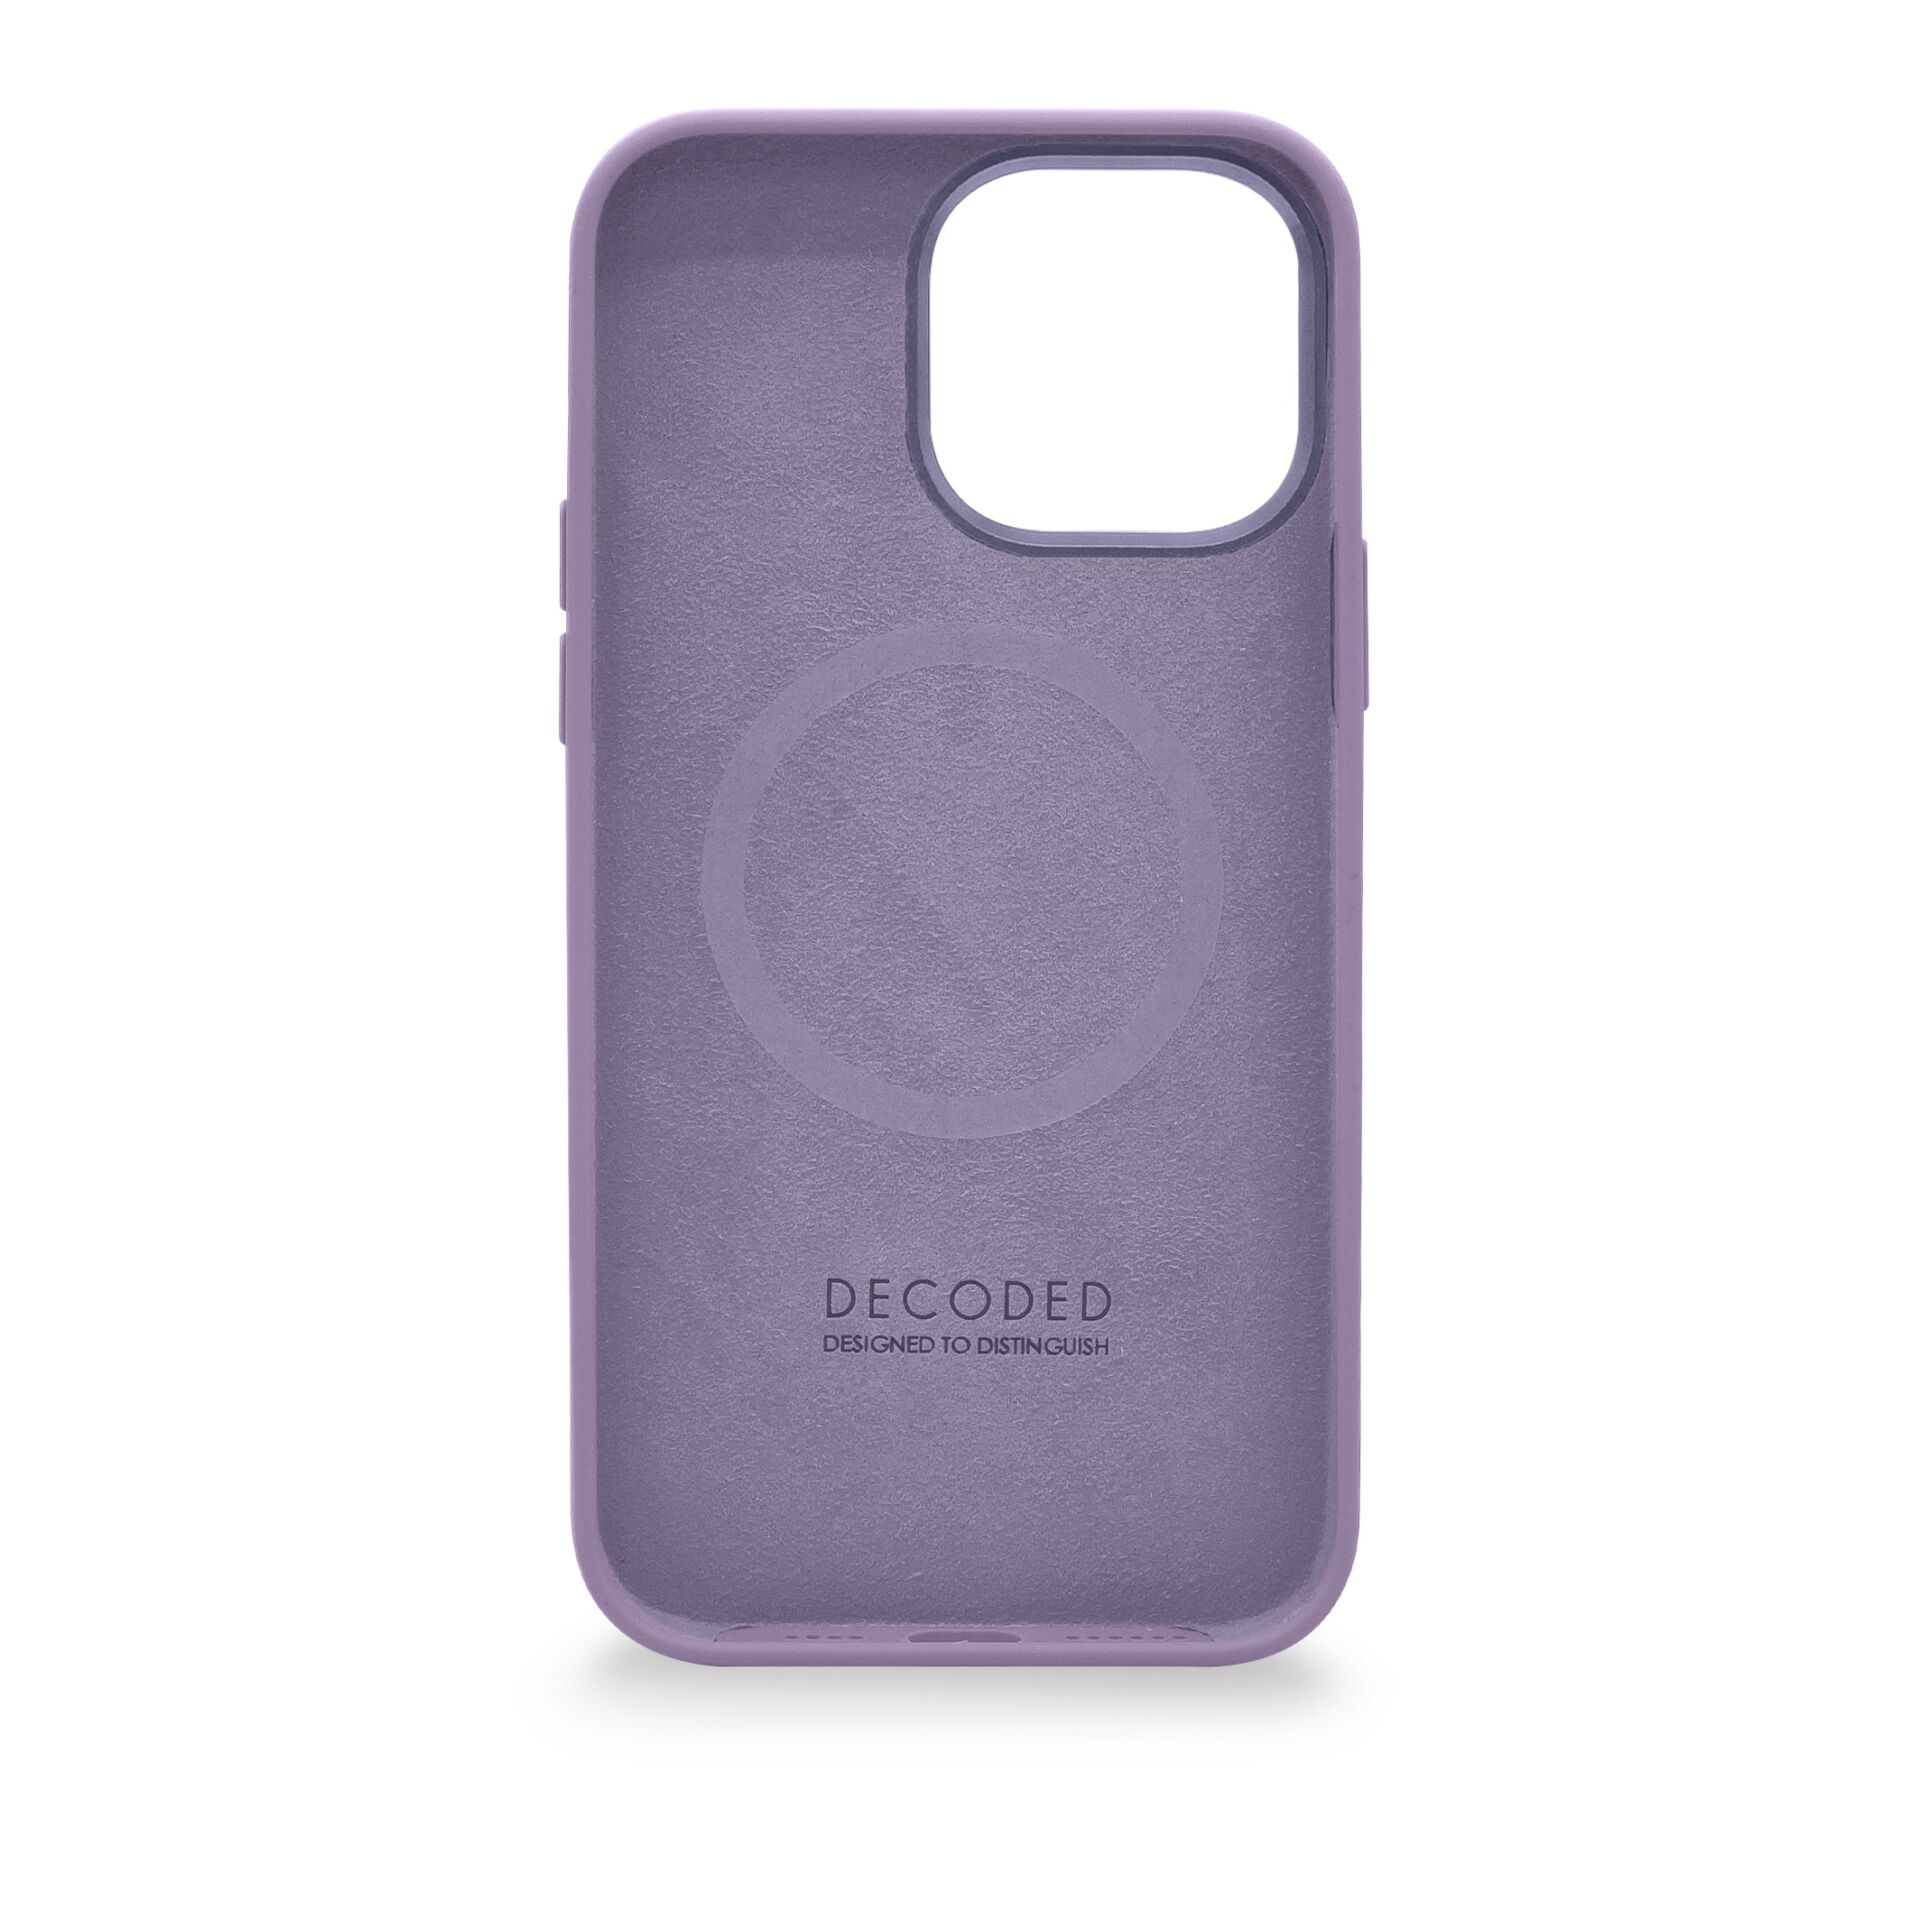 Silicone Apple, DECODED Lavender Backcover, Max, Pro Lavender, iPhone Backcover 14 AntiMicrobial